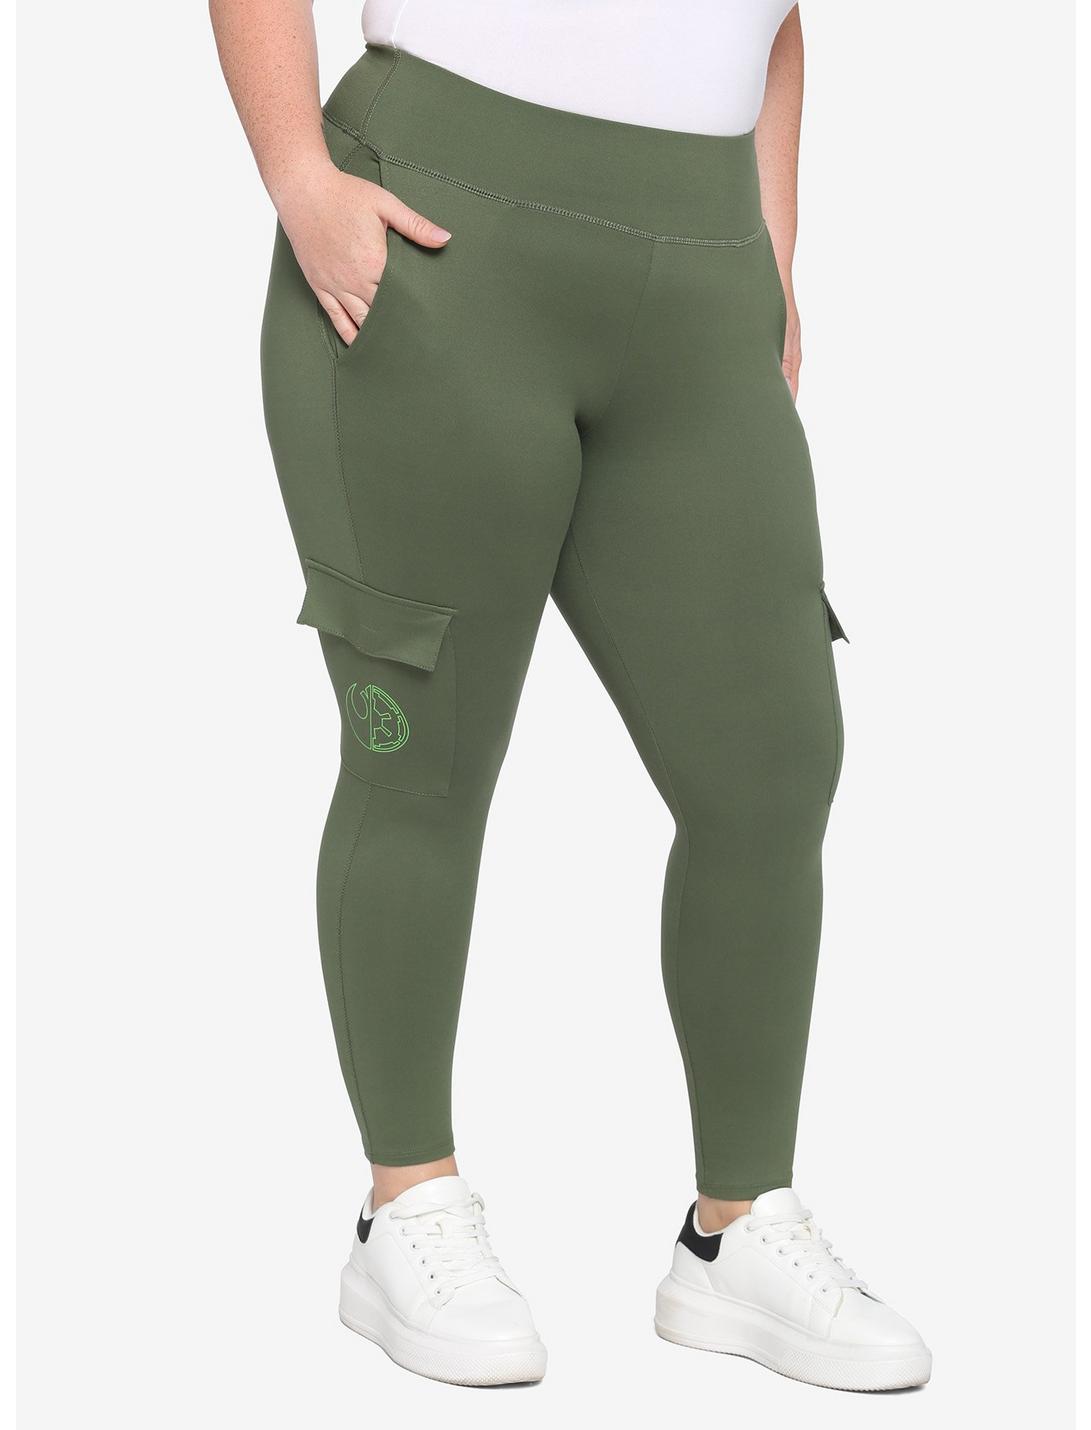 Her Universe Star Wars Utility Leggings Plus Size Her Universe Exclusive, MULTI, hi-res